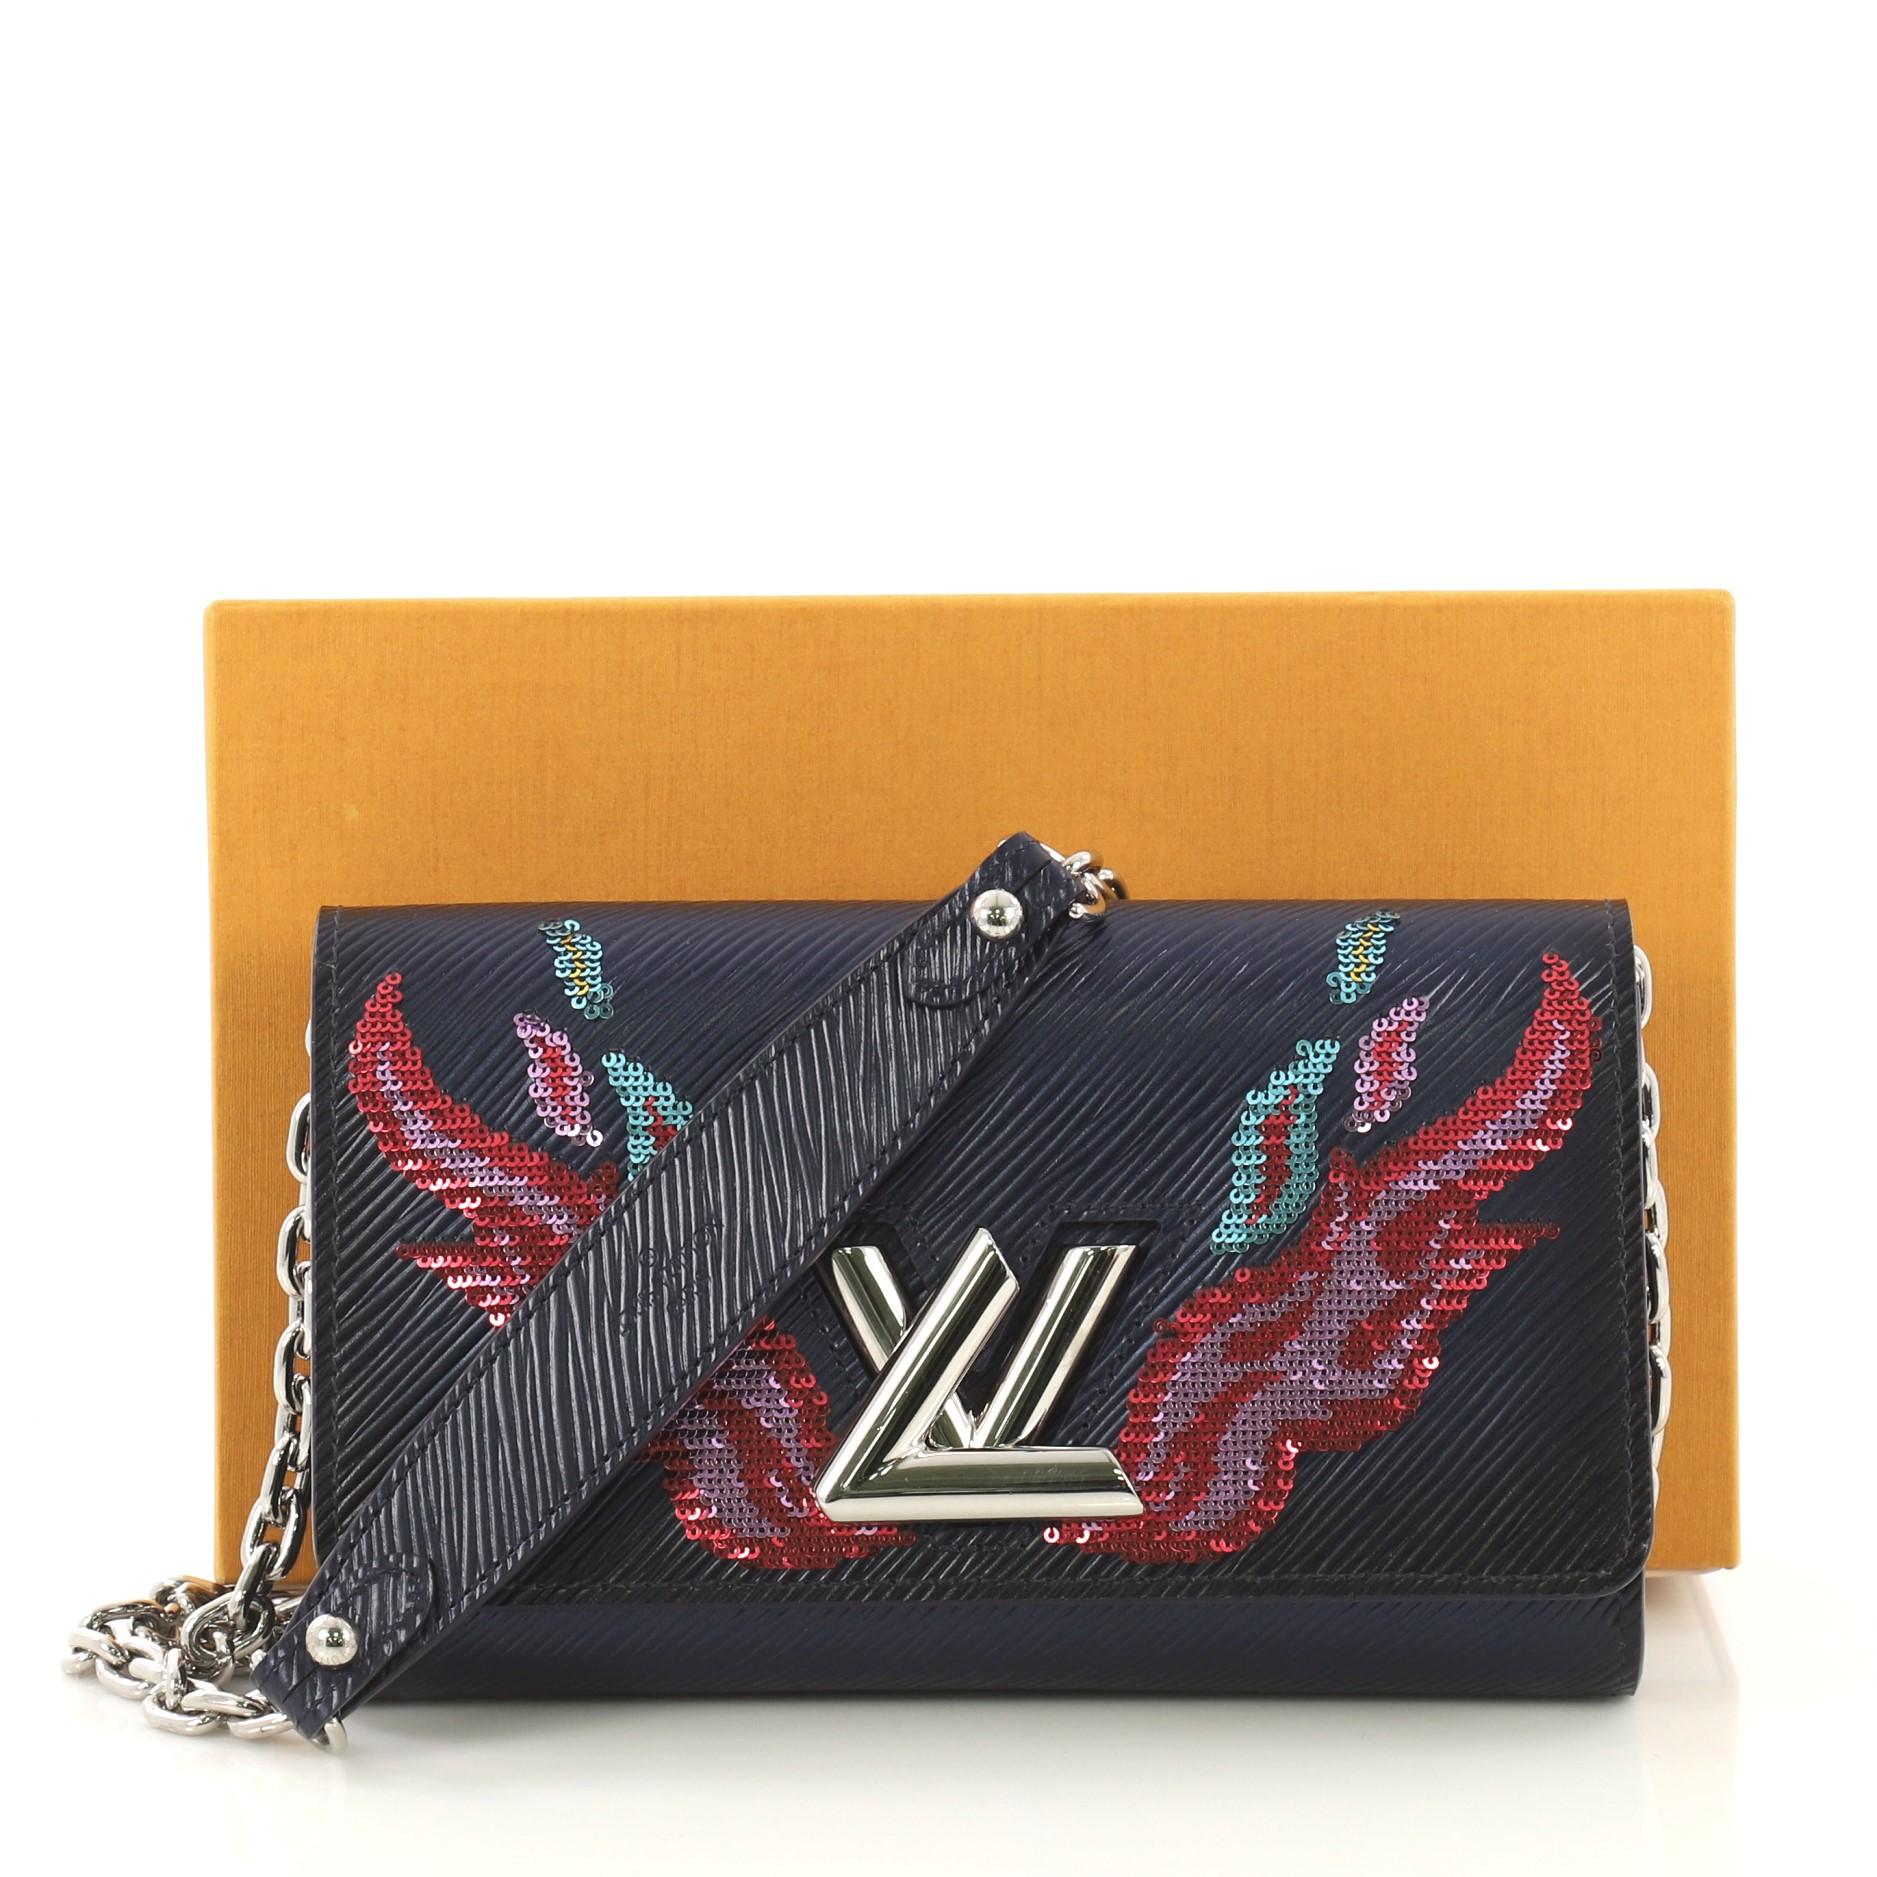 This Louis Vuitton Twist Chain Wallet Epi Leather with Sequins, crafted in blue epi leather, features sequin-embroidered flame motif, chain strap with leather pad, and silver-tone hardware. Its LV twist-lock closure opens to a blue leather interior